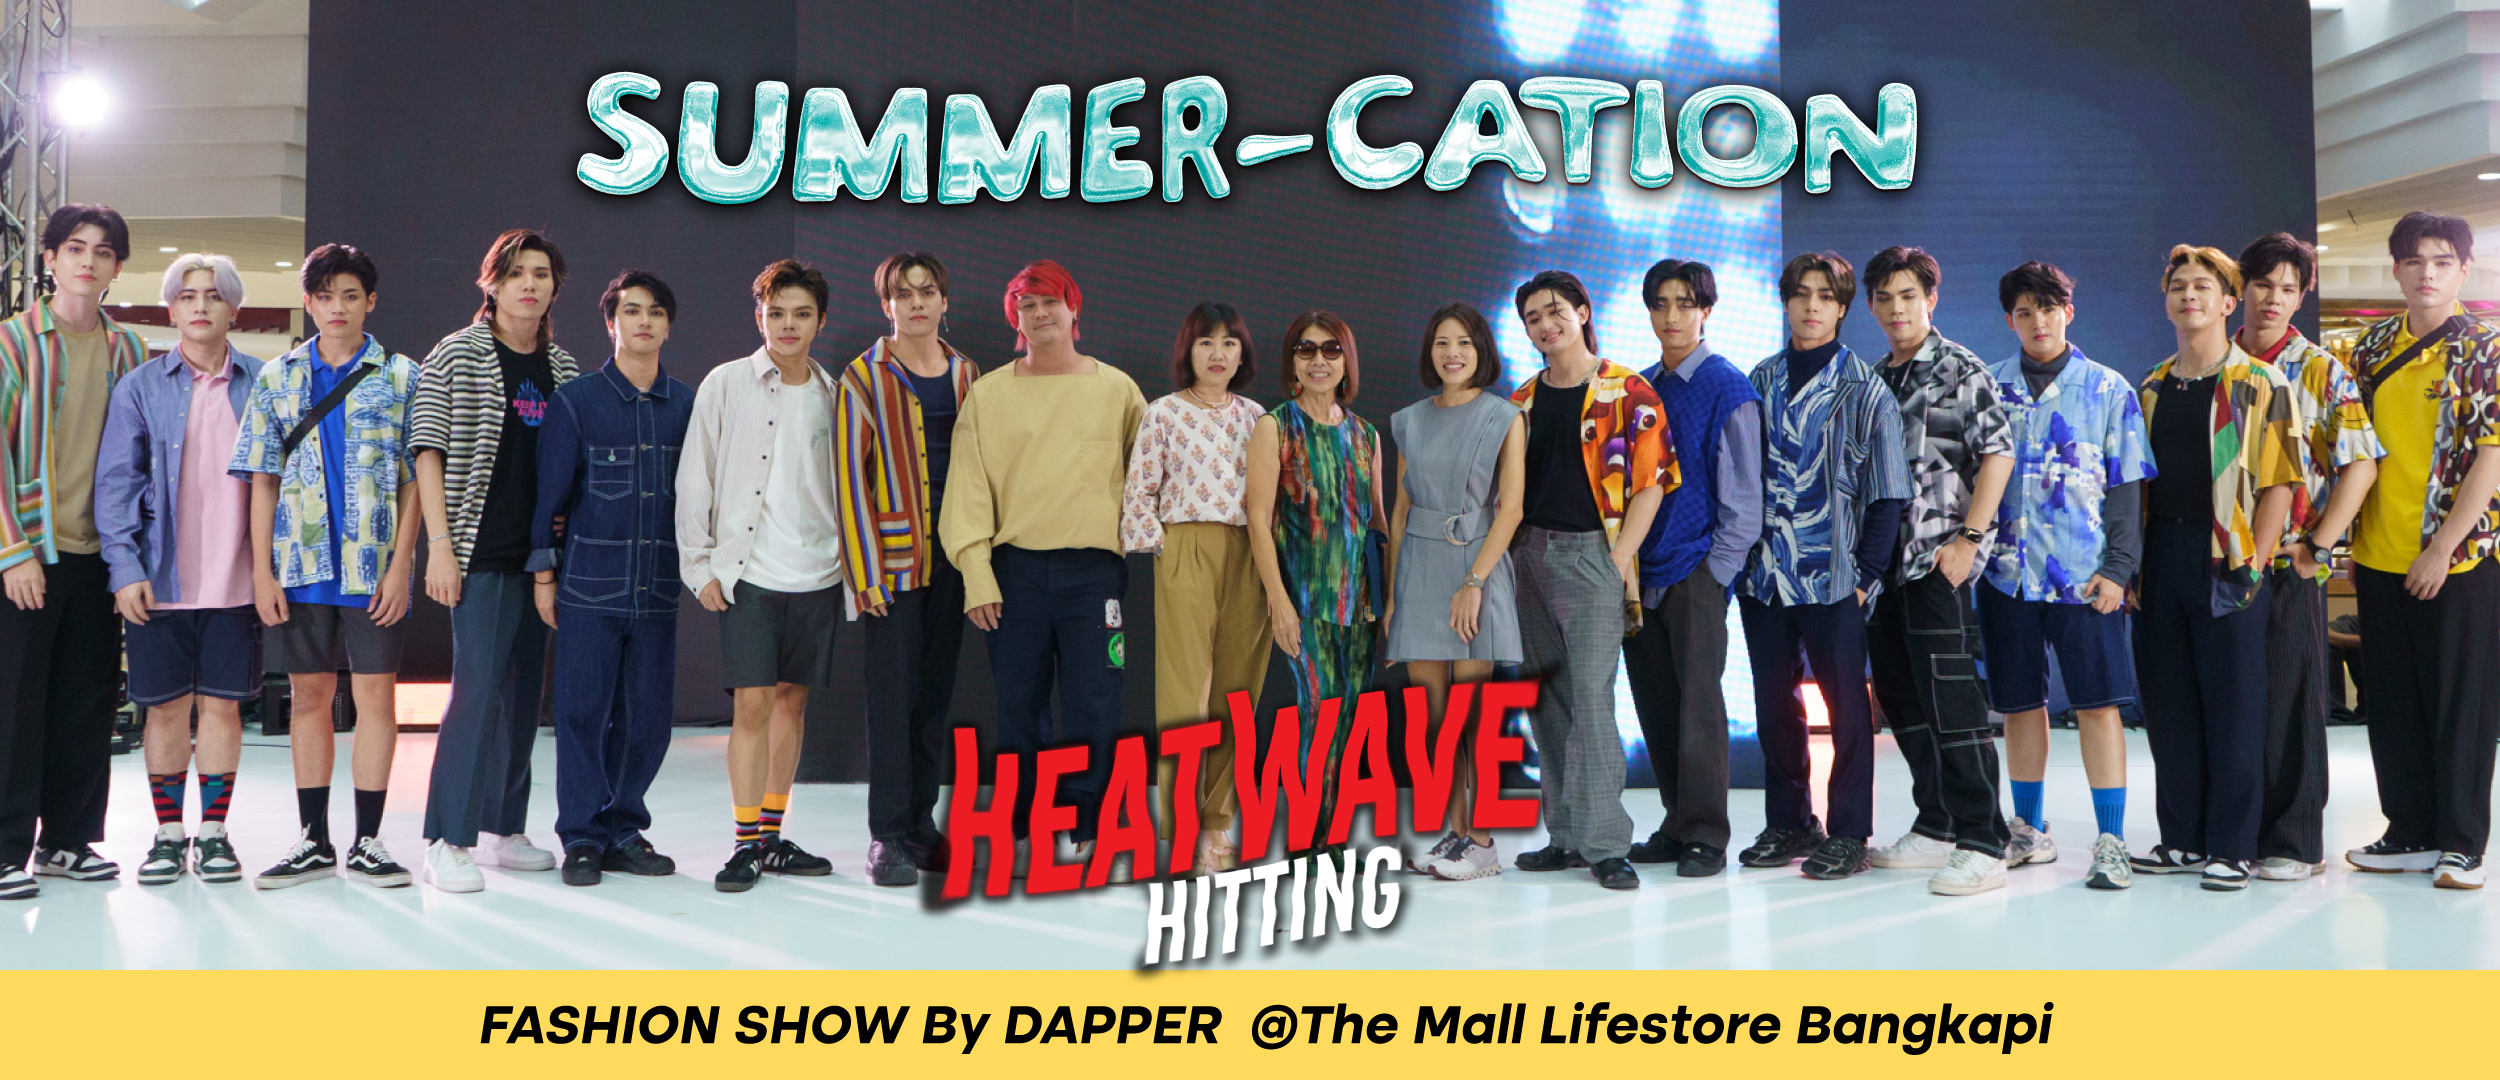 Summer-Cation Heatwave Hitting Fashion Show By DAPPER, DAPPER | Style, Like No Others!